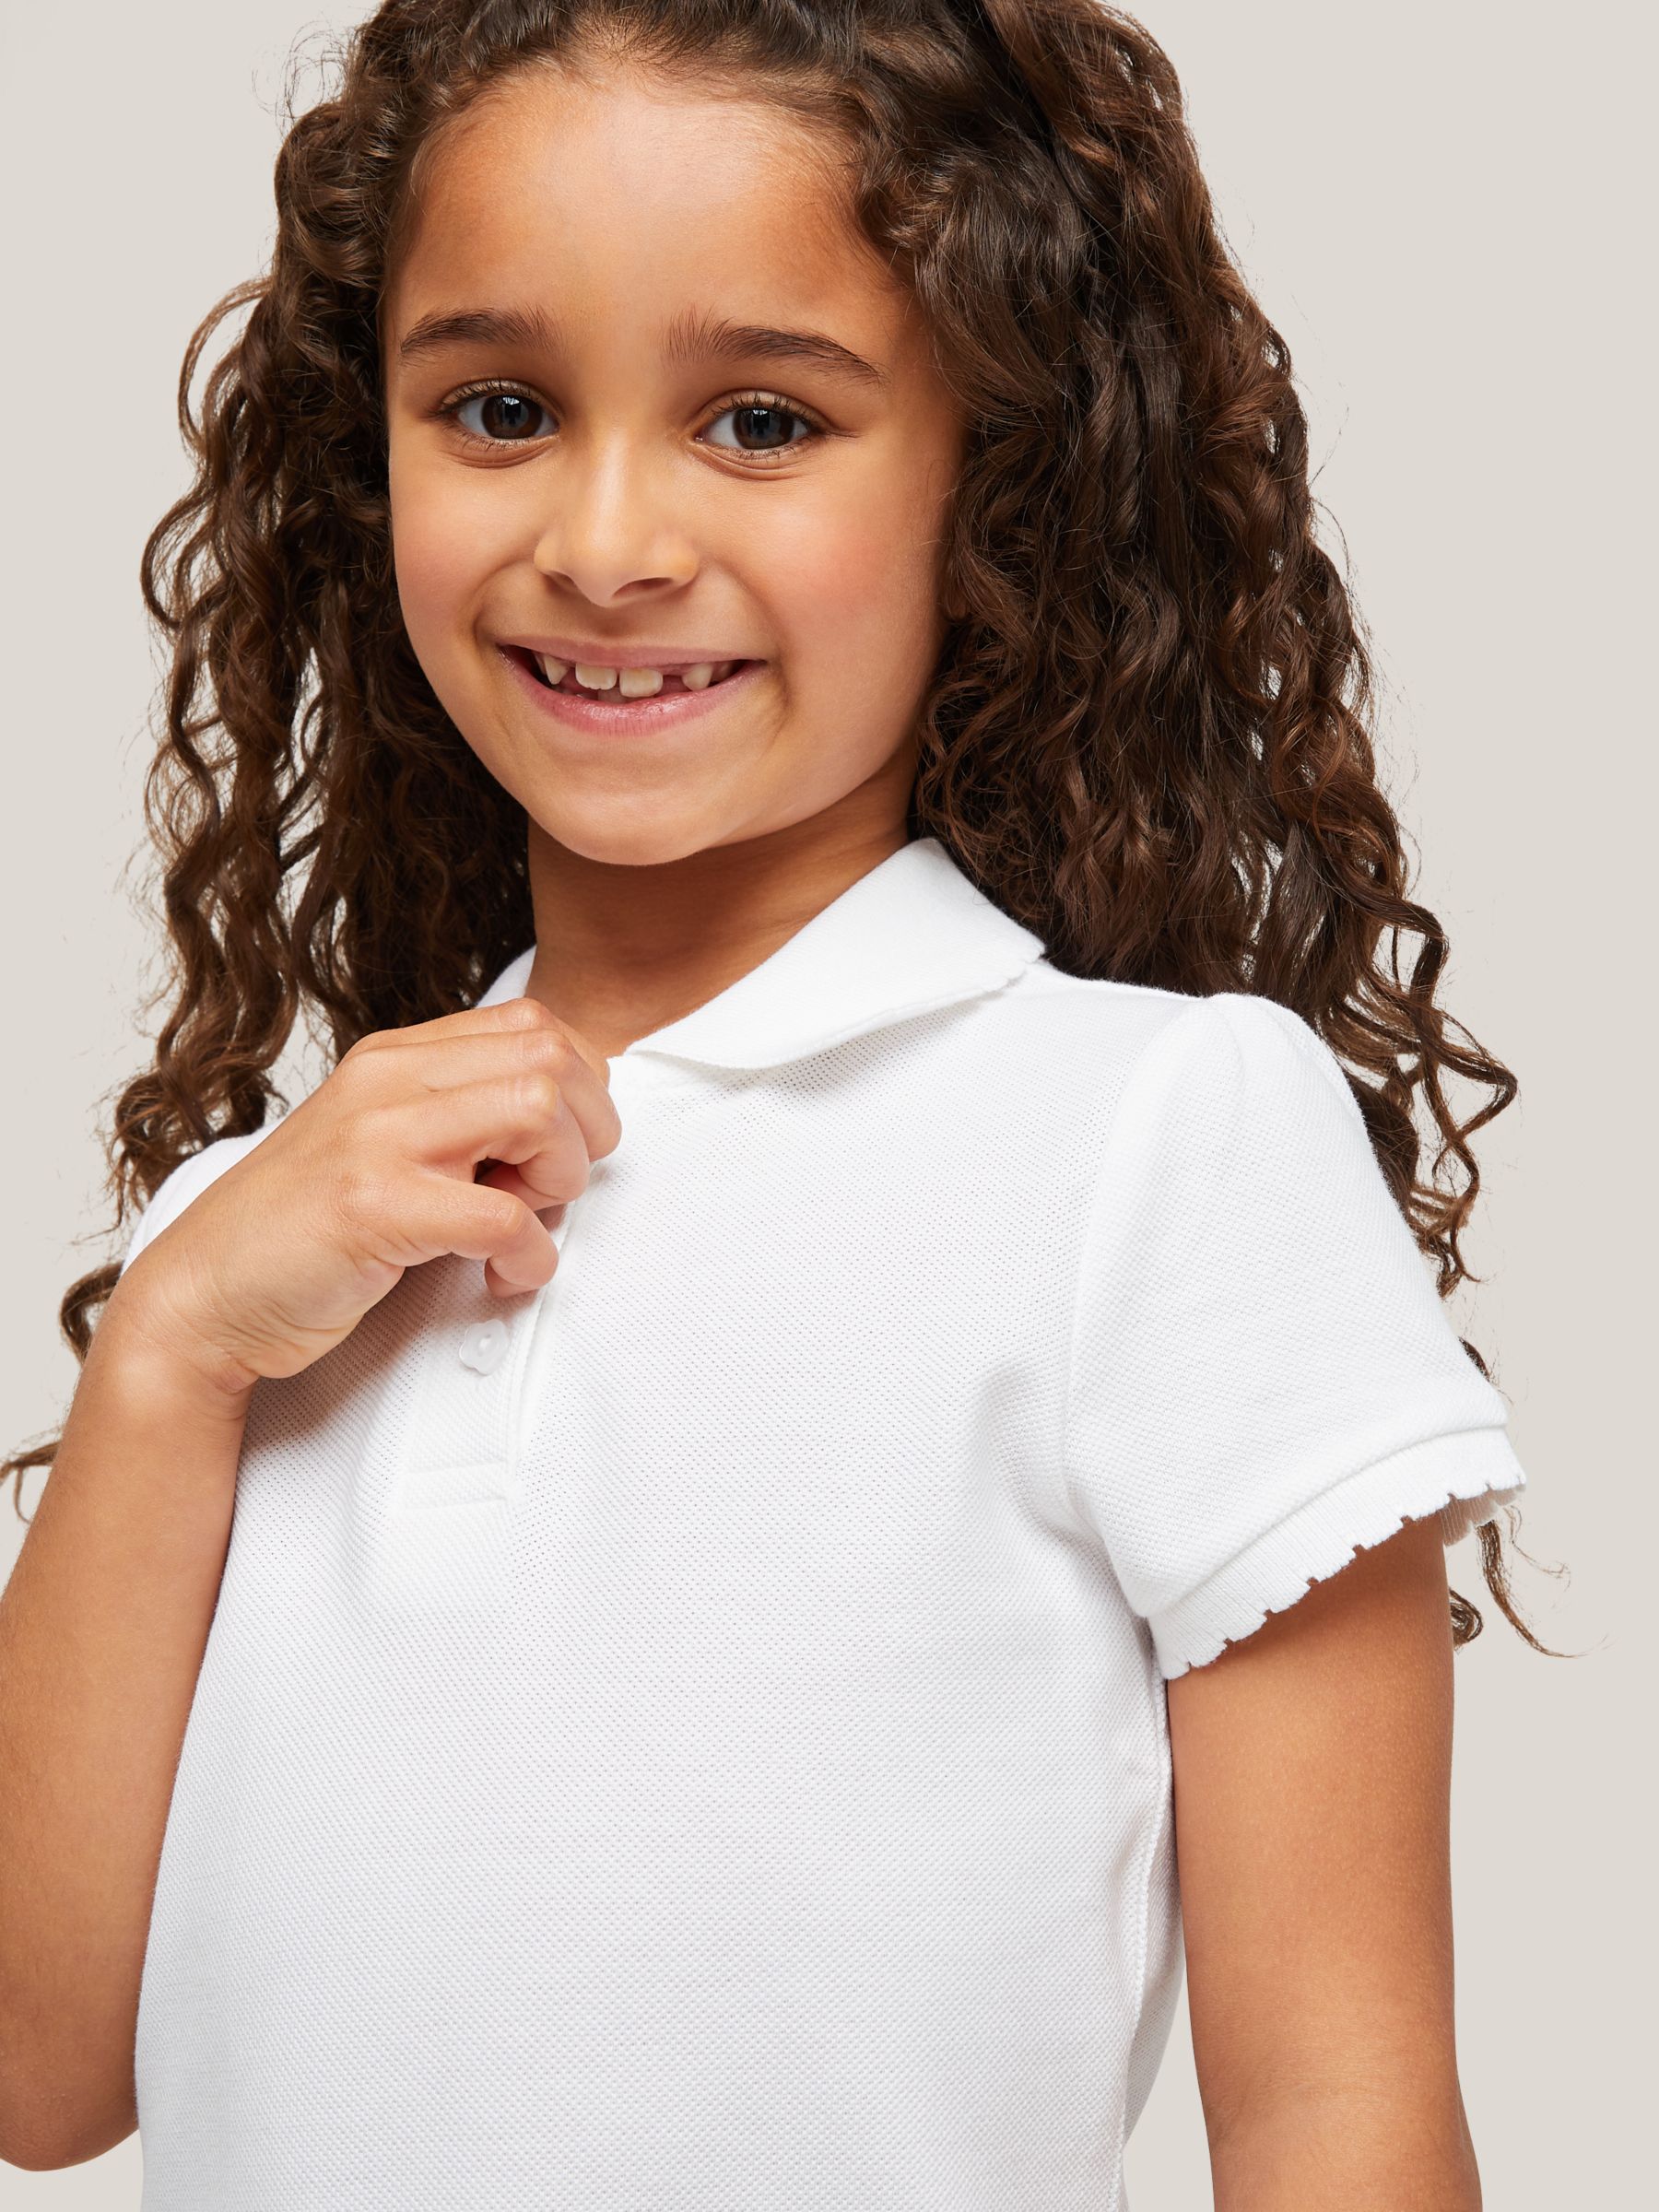 Buy John Lewis Pure Cotton Easy Care Scallop Collar School Polo Shirt, Pack of 2, White Online at johnlewis.com